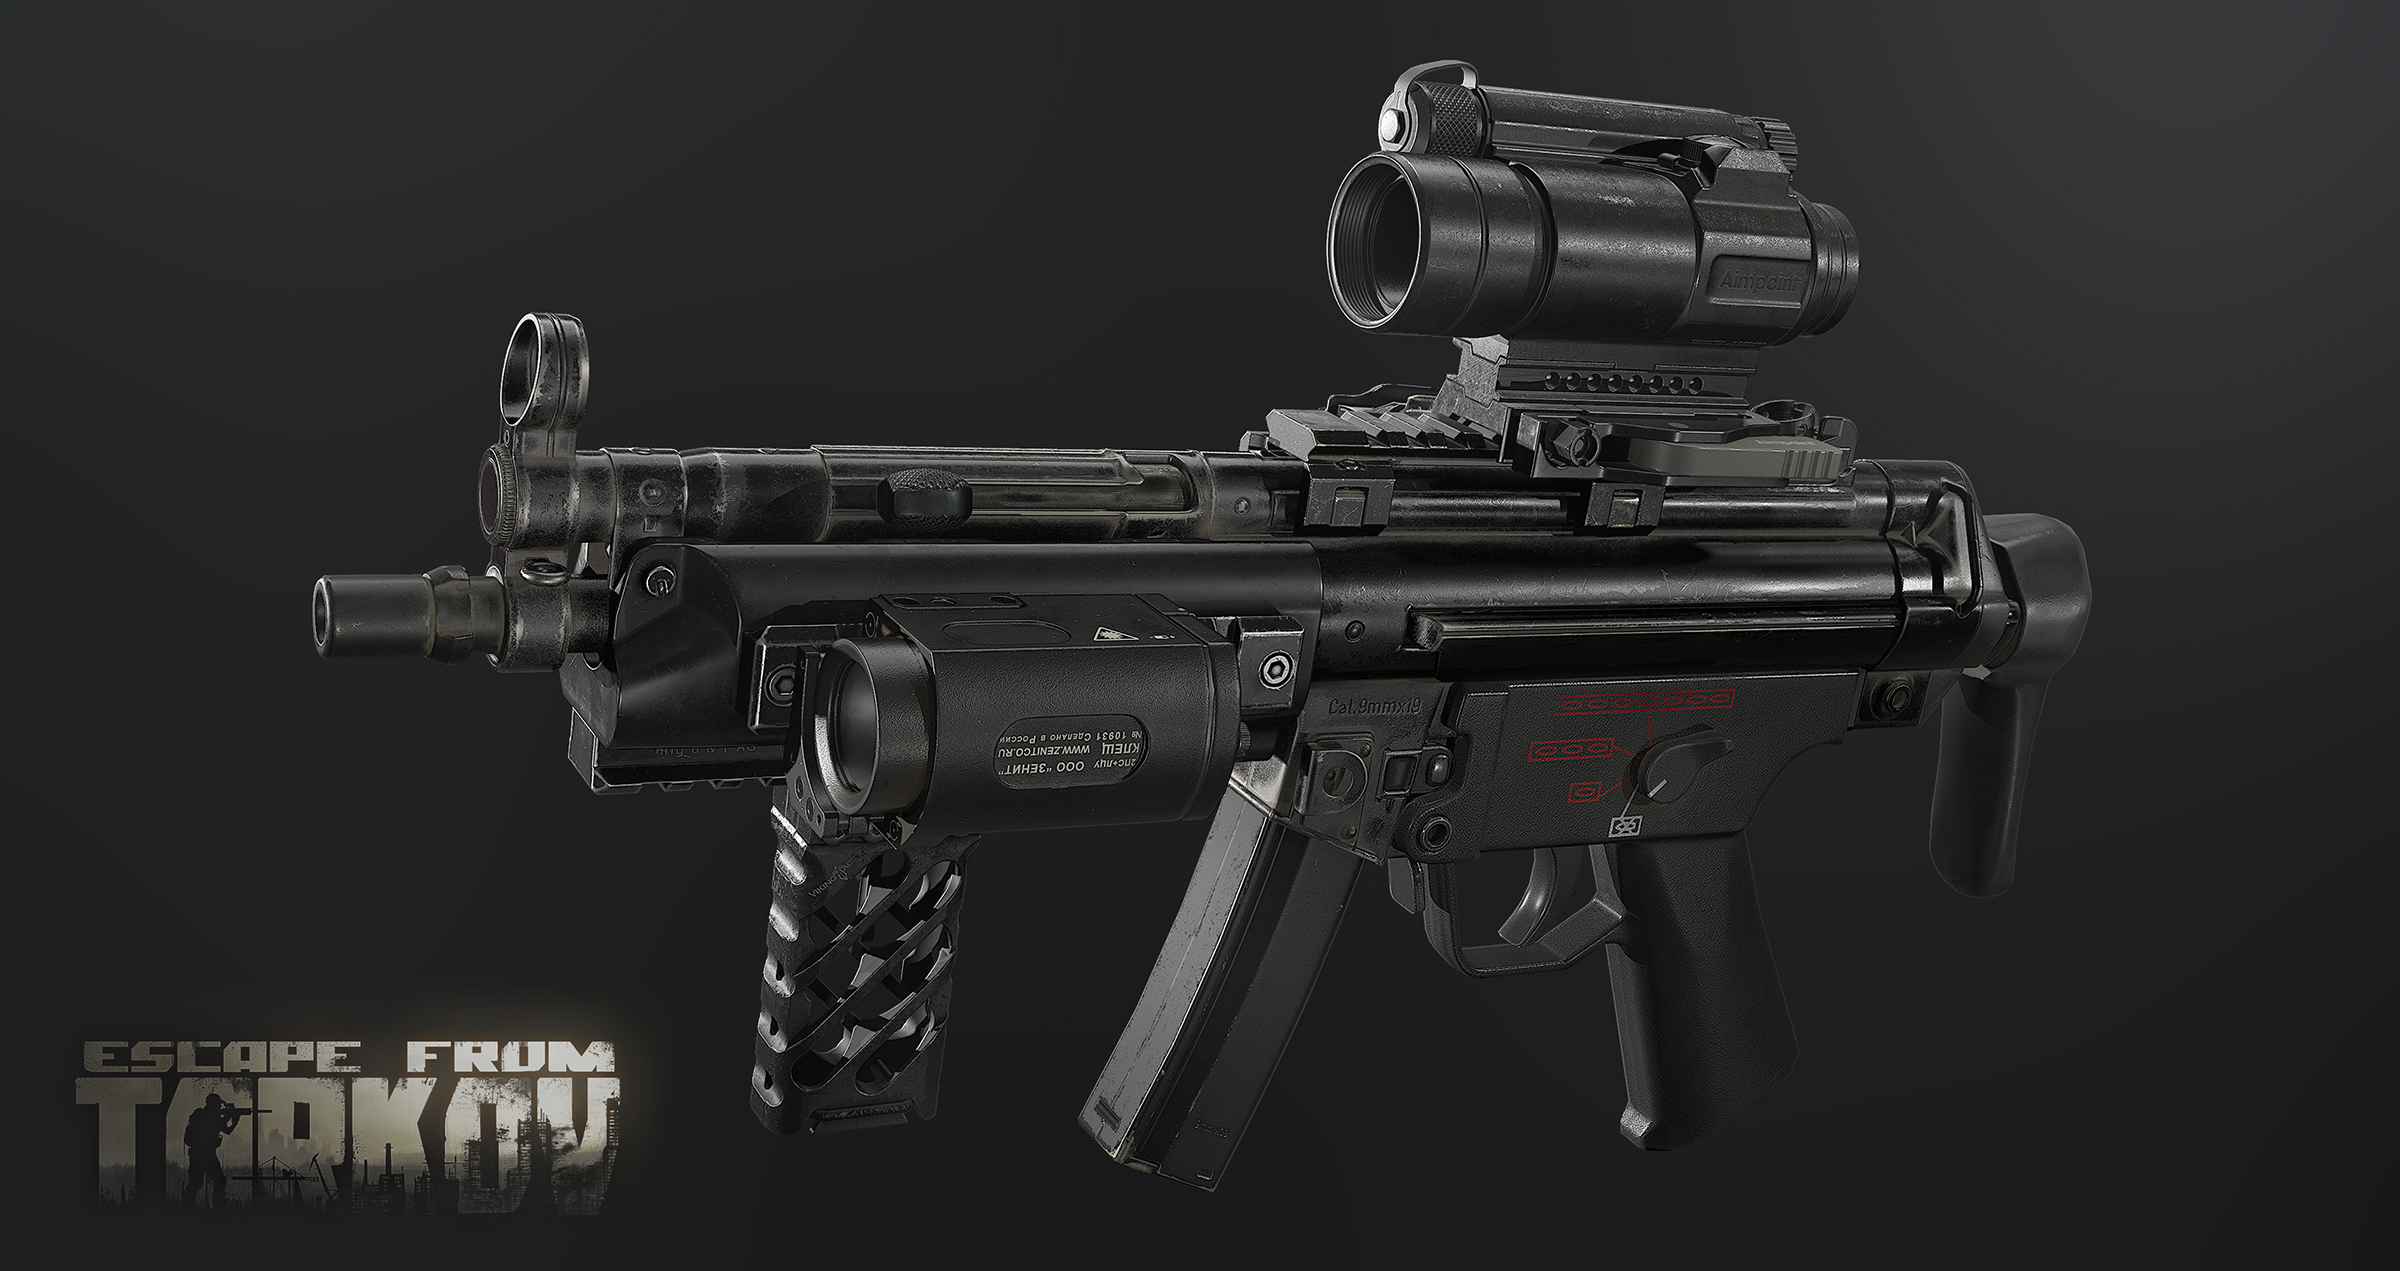 Escape from Tarkov Screenshots of HK MP5 SMG and its variants in Escape from Tarkov - 1